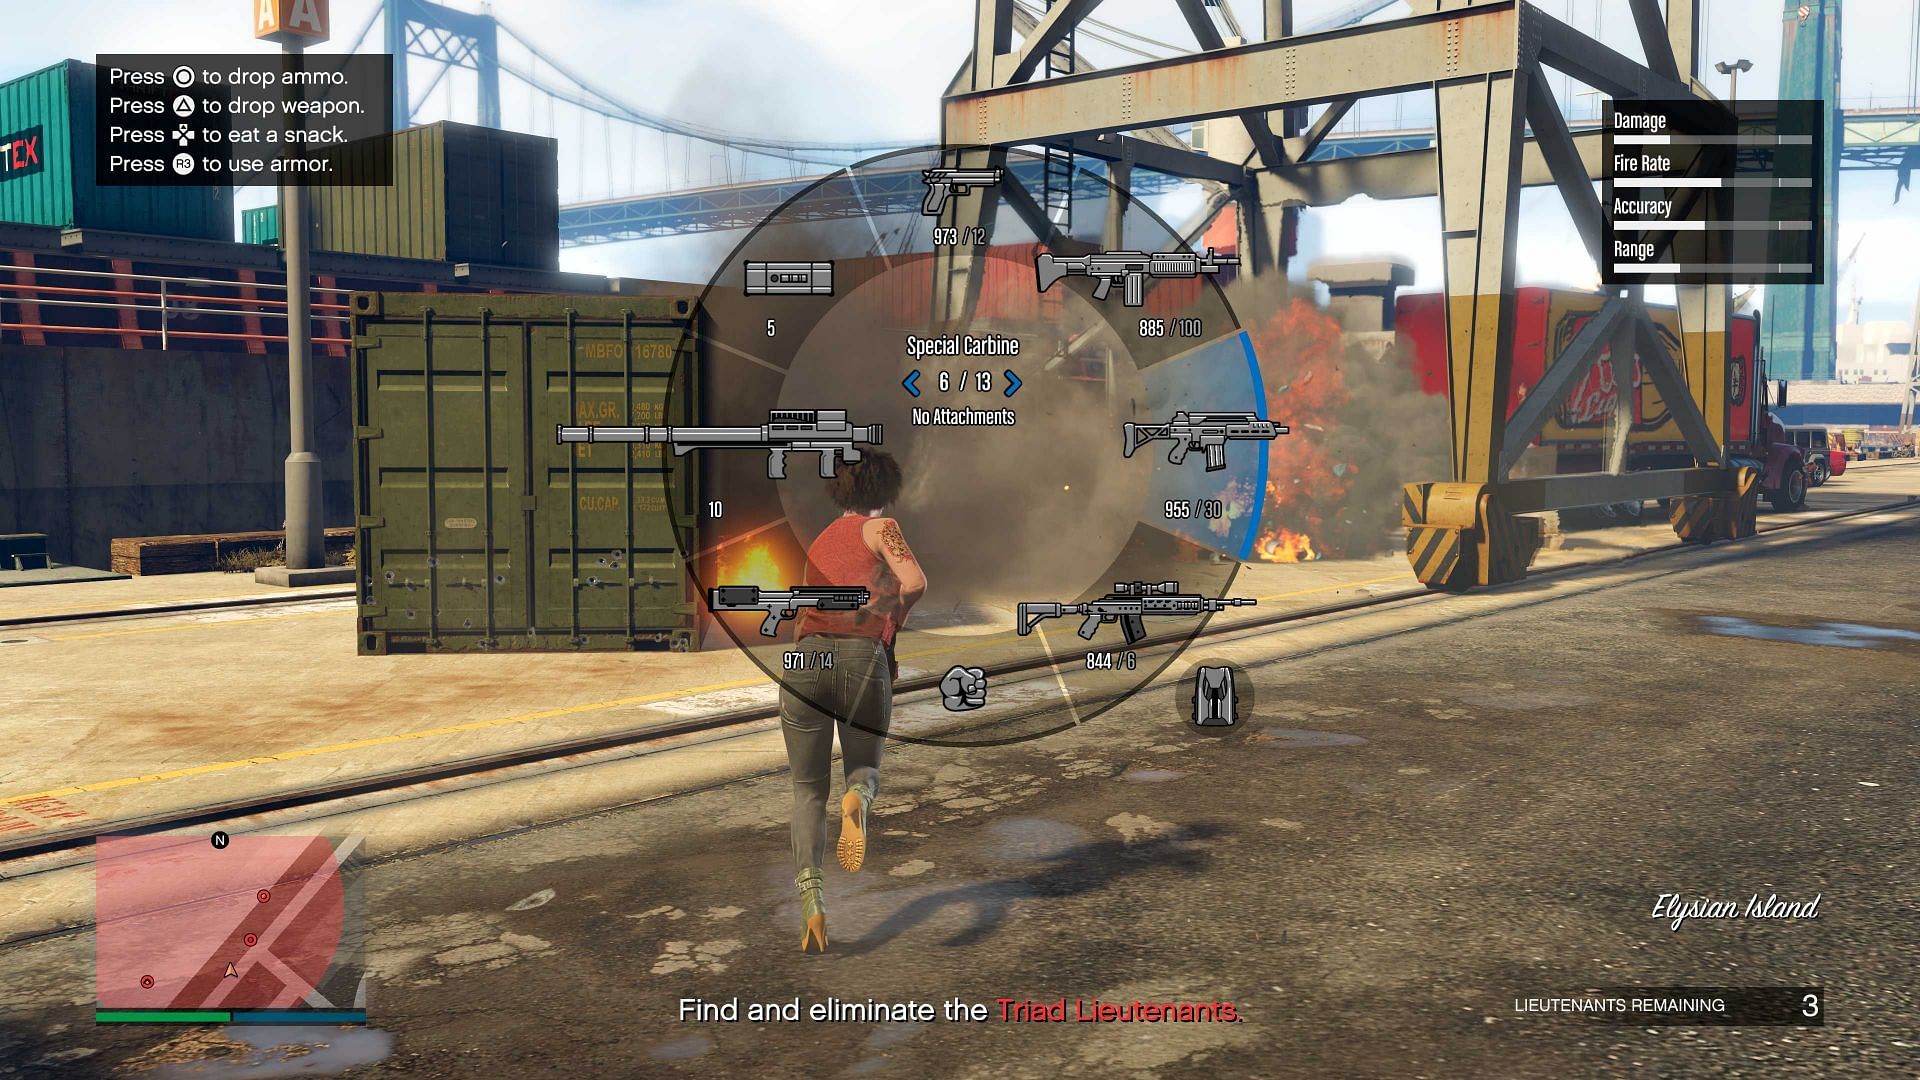 Snacks and armor can be accessed from the weapon wheel via a single button command (Image via Rockstar Games)